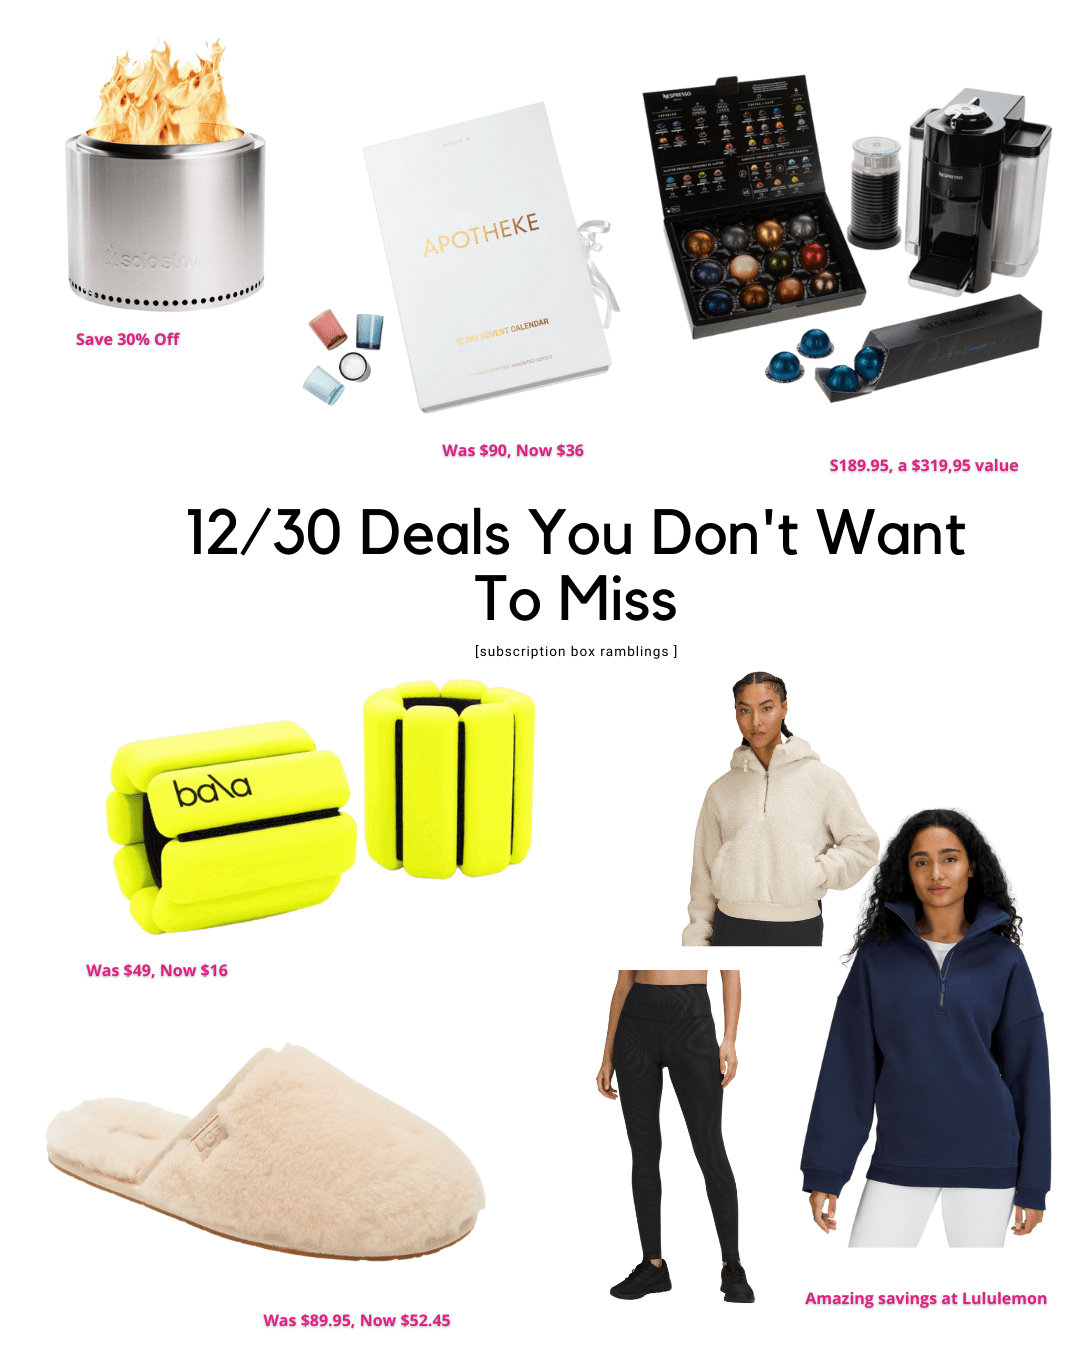 Deals You Don’t Want to Miss – 12/30